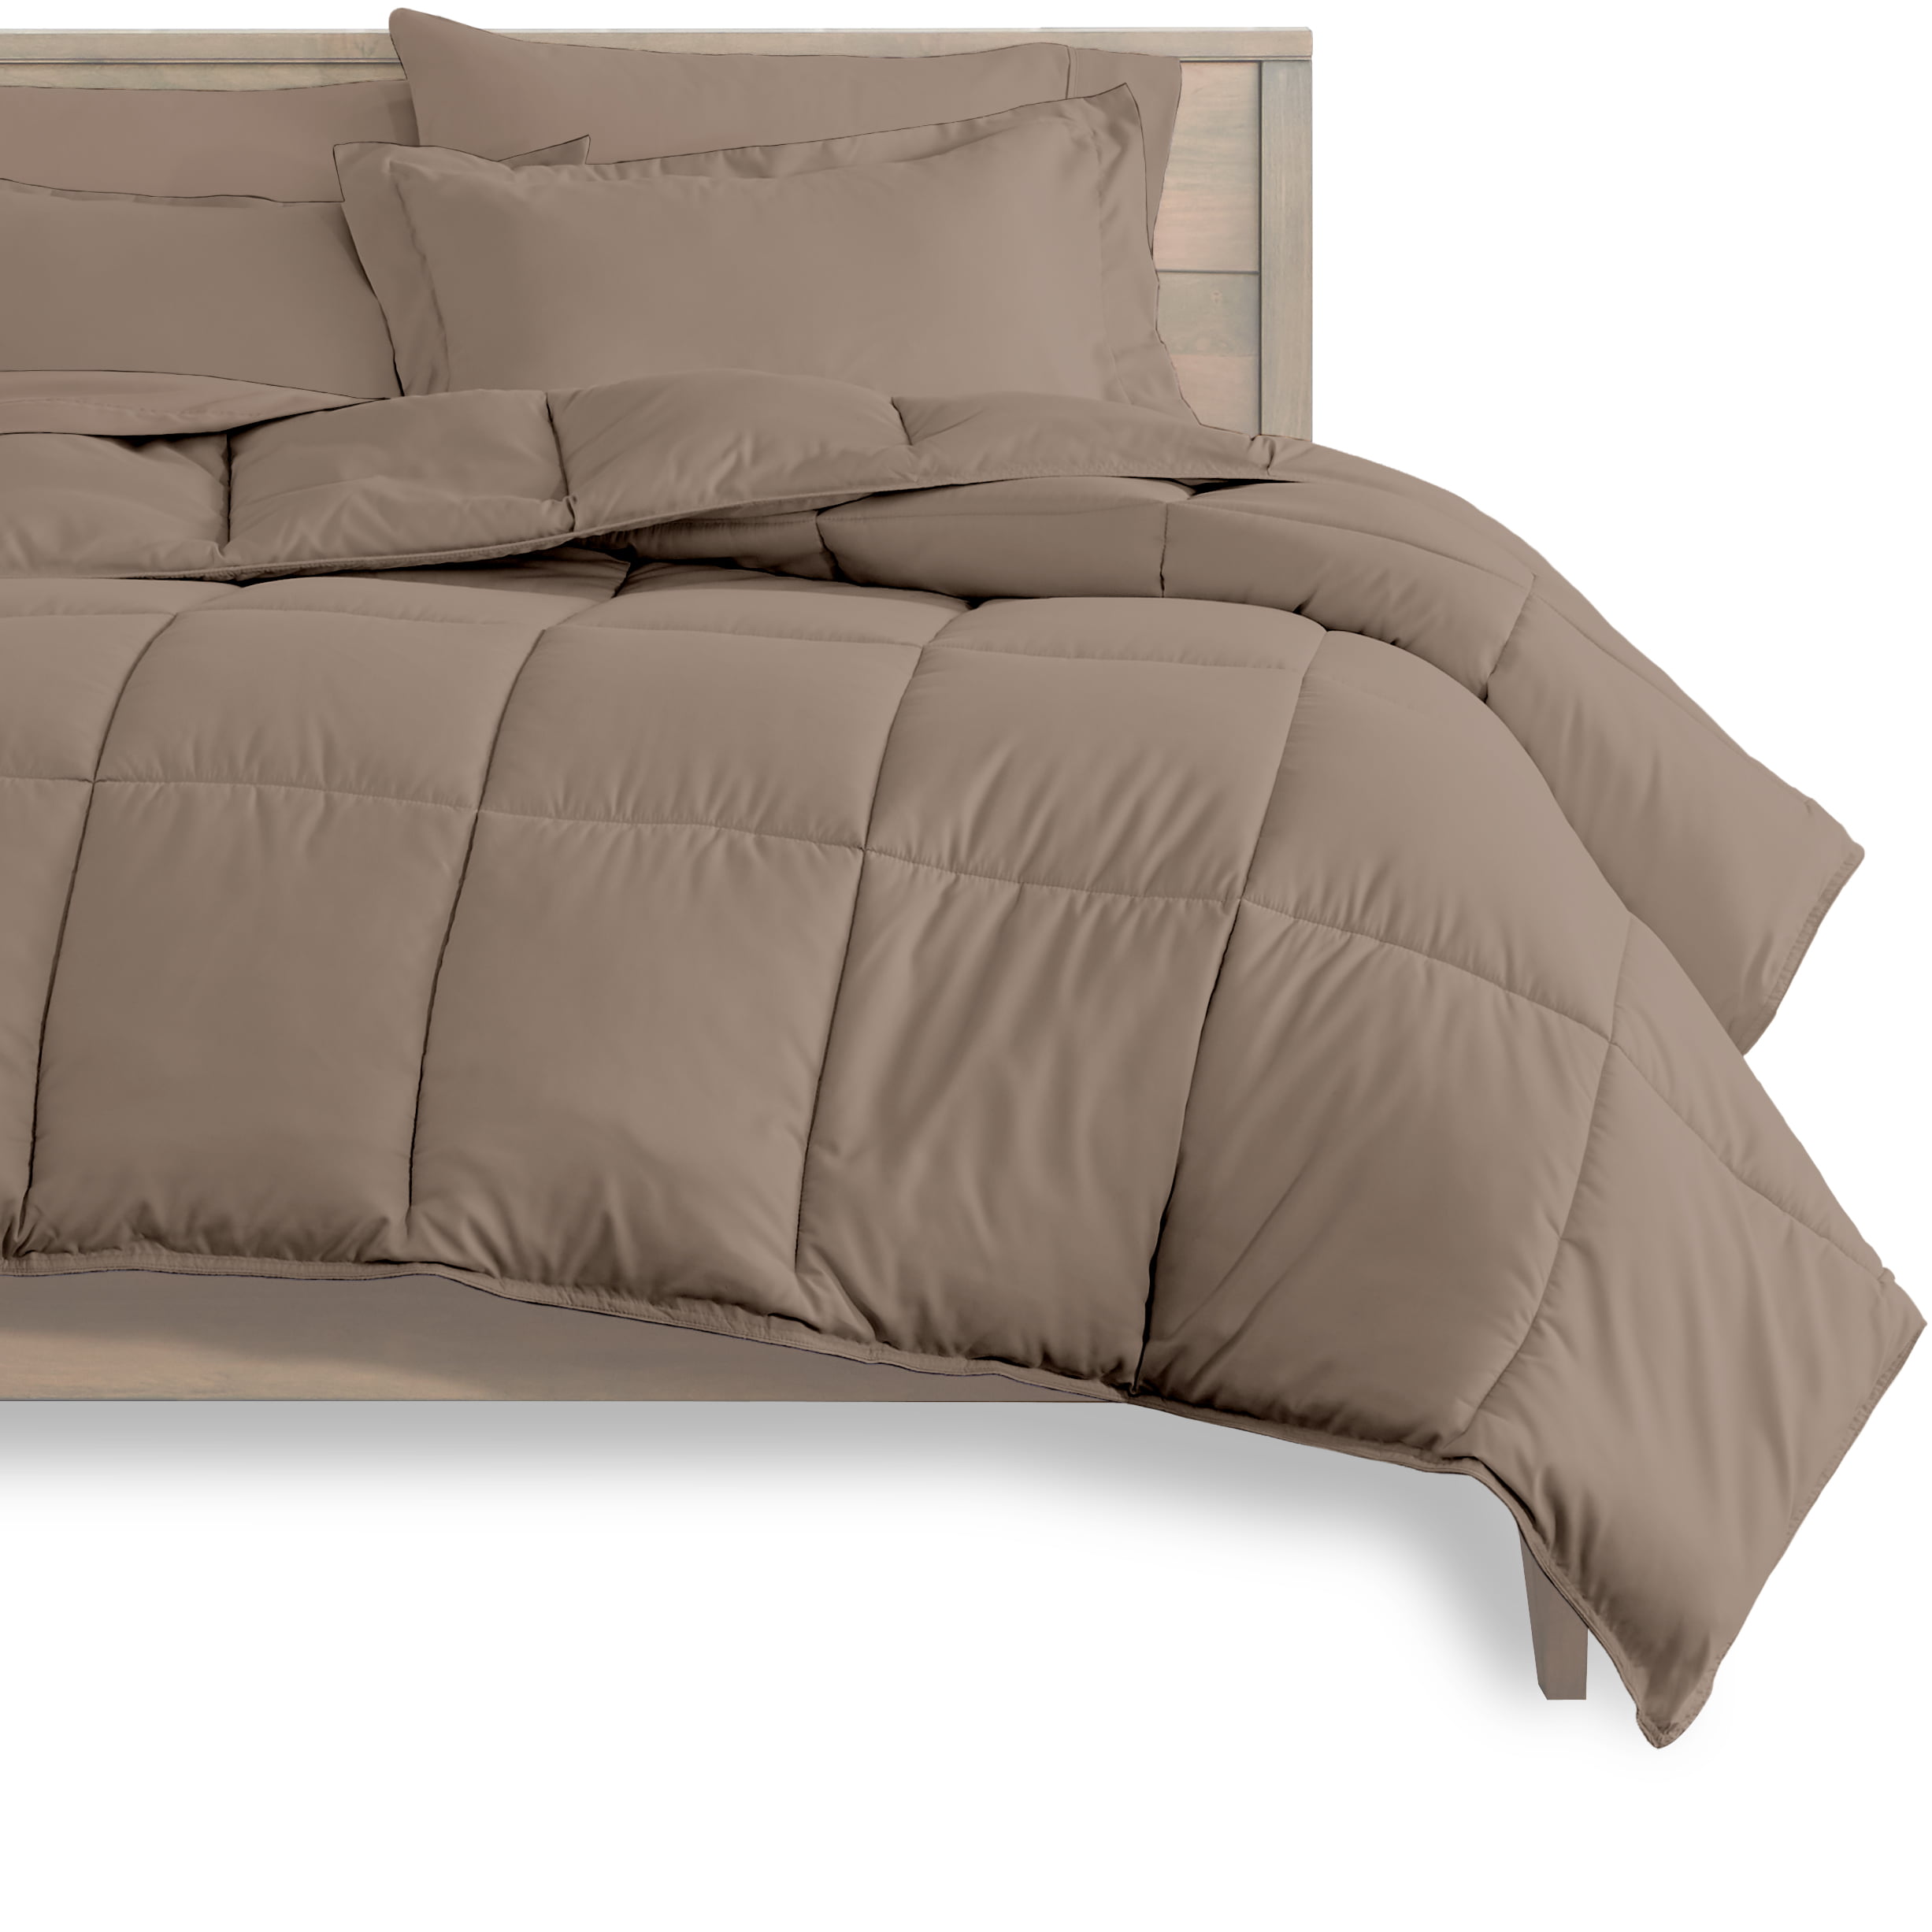 Twin XL, Taupe 4 Piece Microfiber Sheet Set with 2 Pillowcases Bare Home Bedding Bundle 